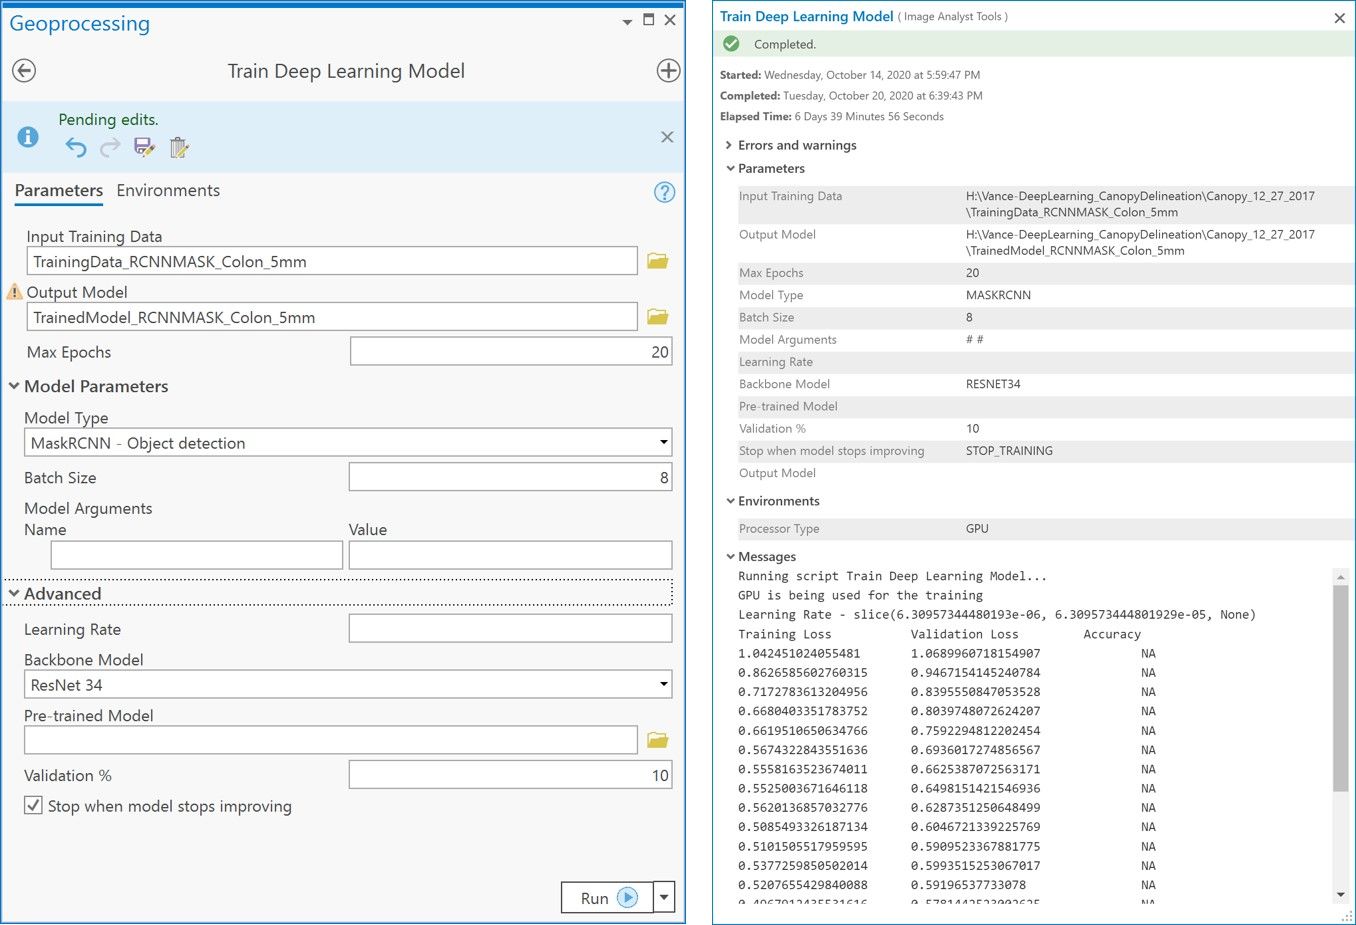 Input to the ArcGIS Pro “Train Deep Learning Model” tool. Left: screen snapshot showing input parameters; Right: messages produced by the tool while training the Mask RCNN model showing training and validation losses for each epoch.